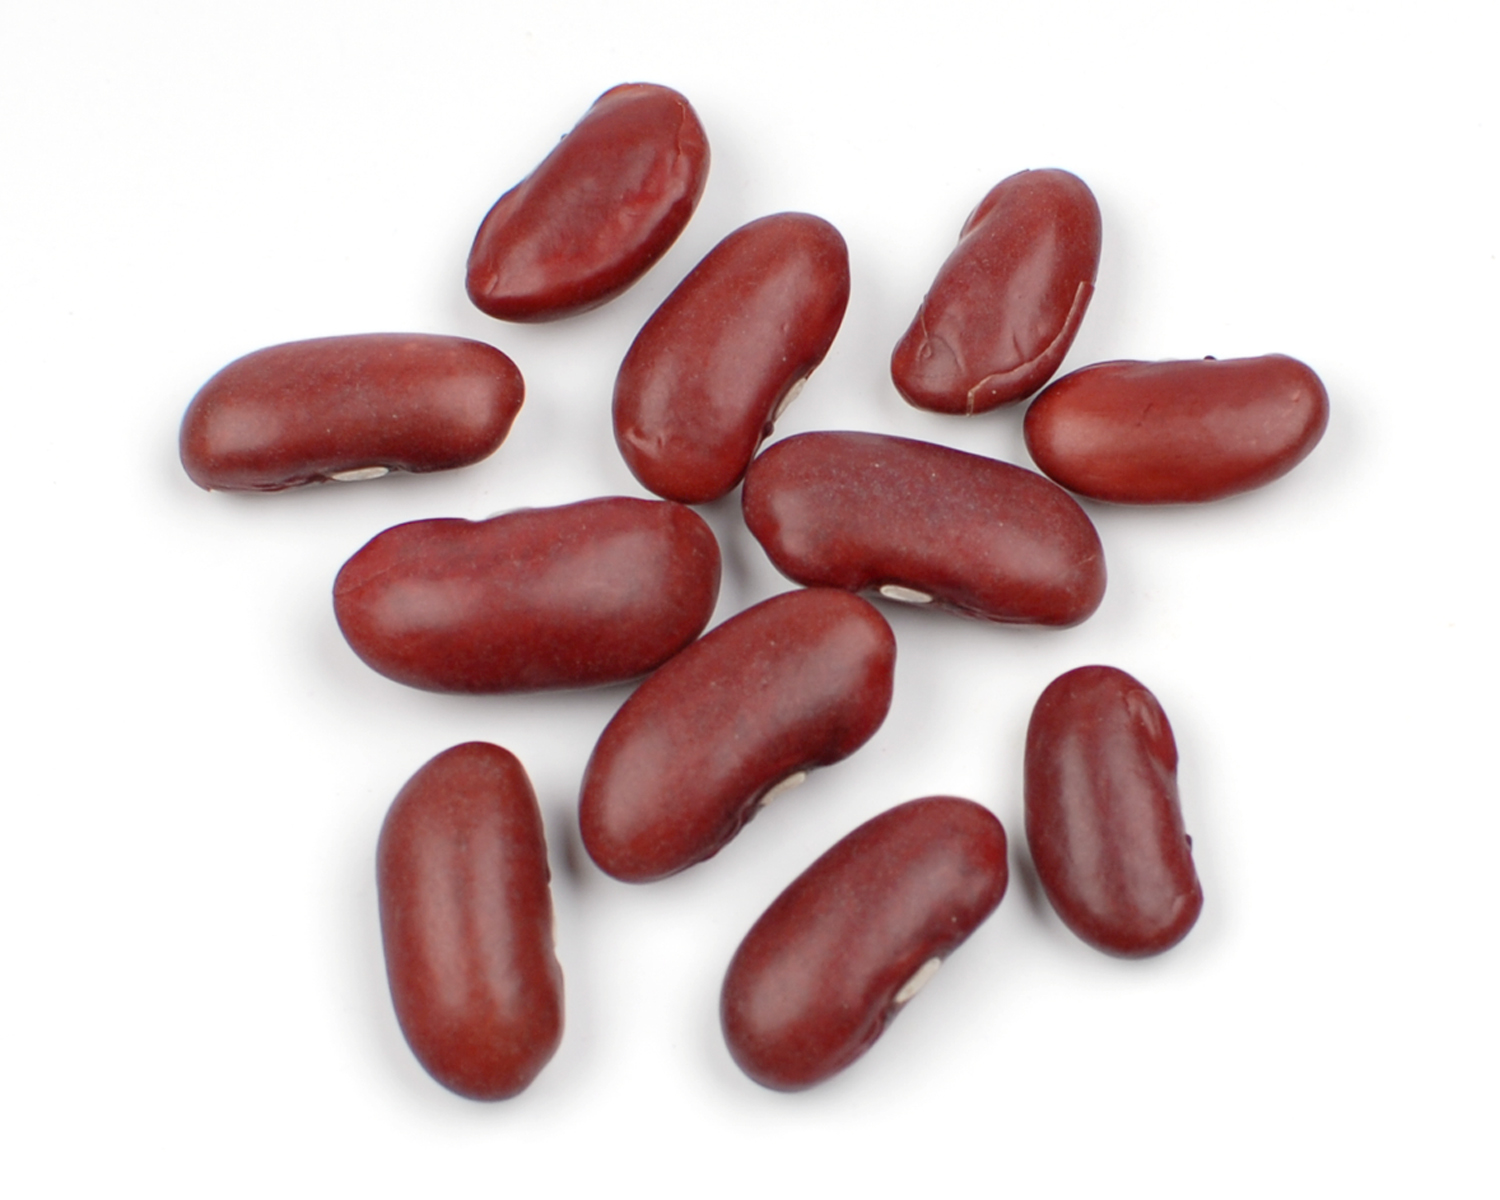 Free dried download clip. Beans clipart kidney bean